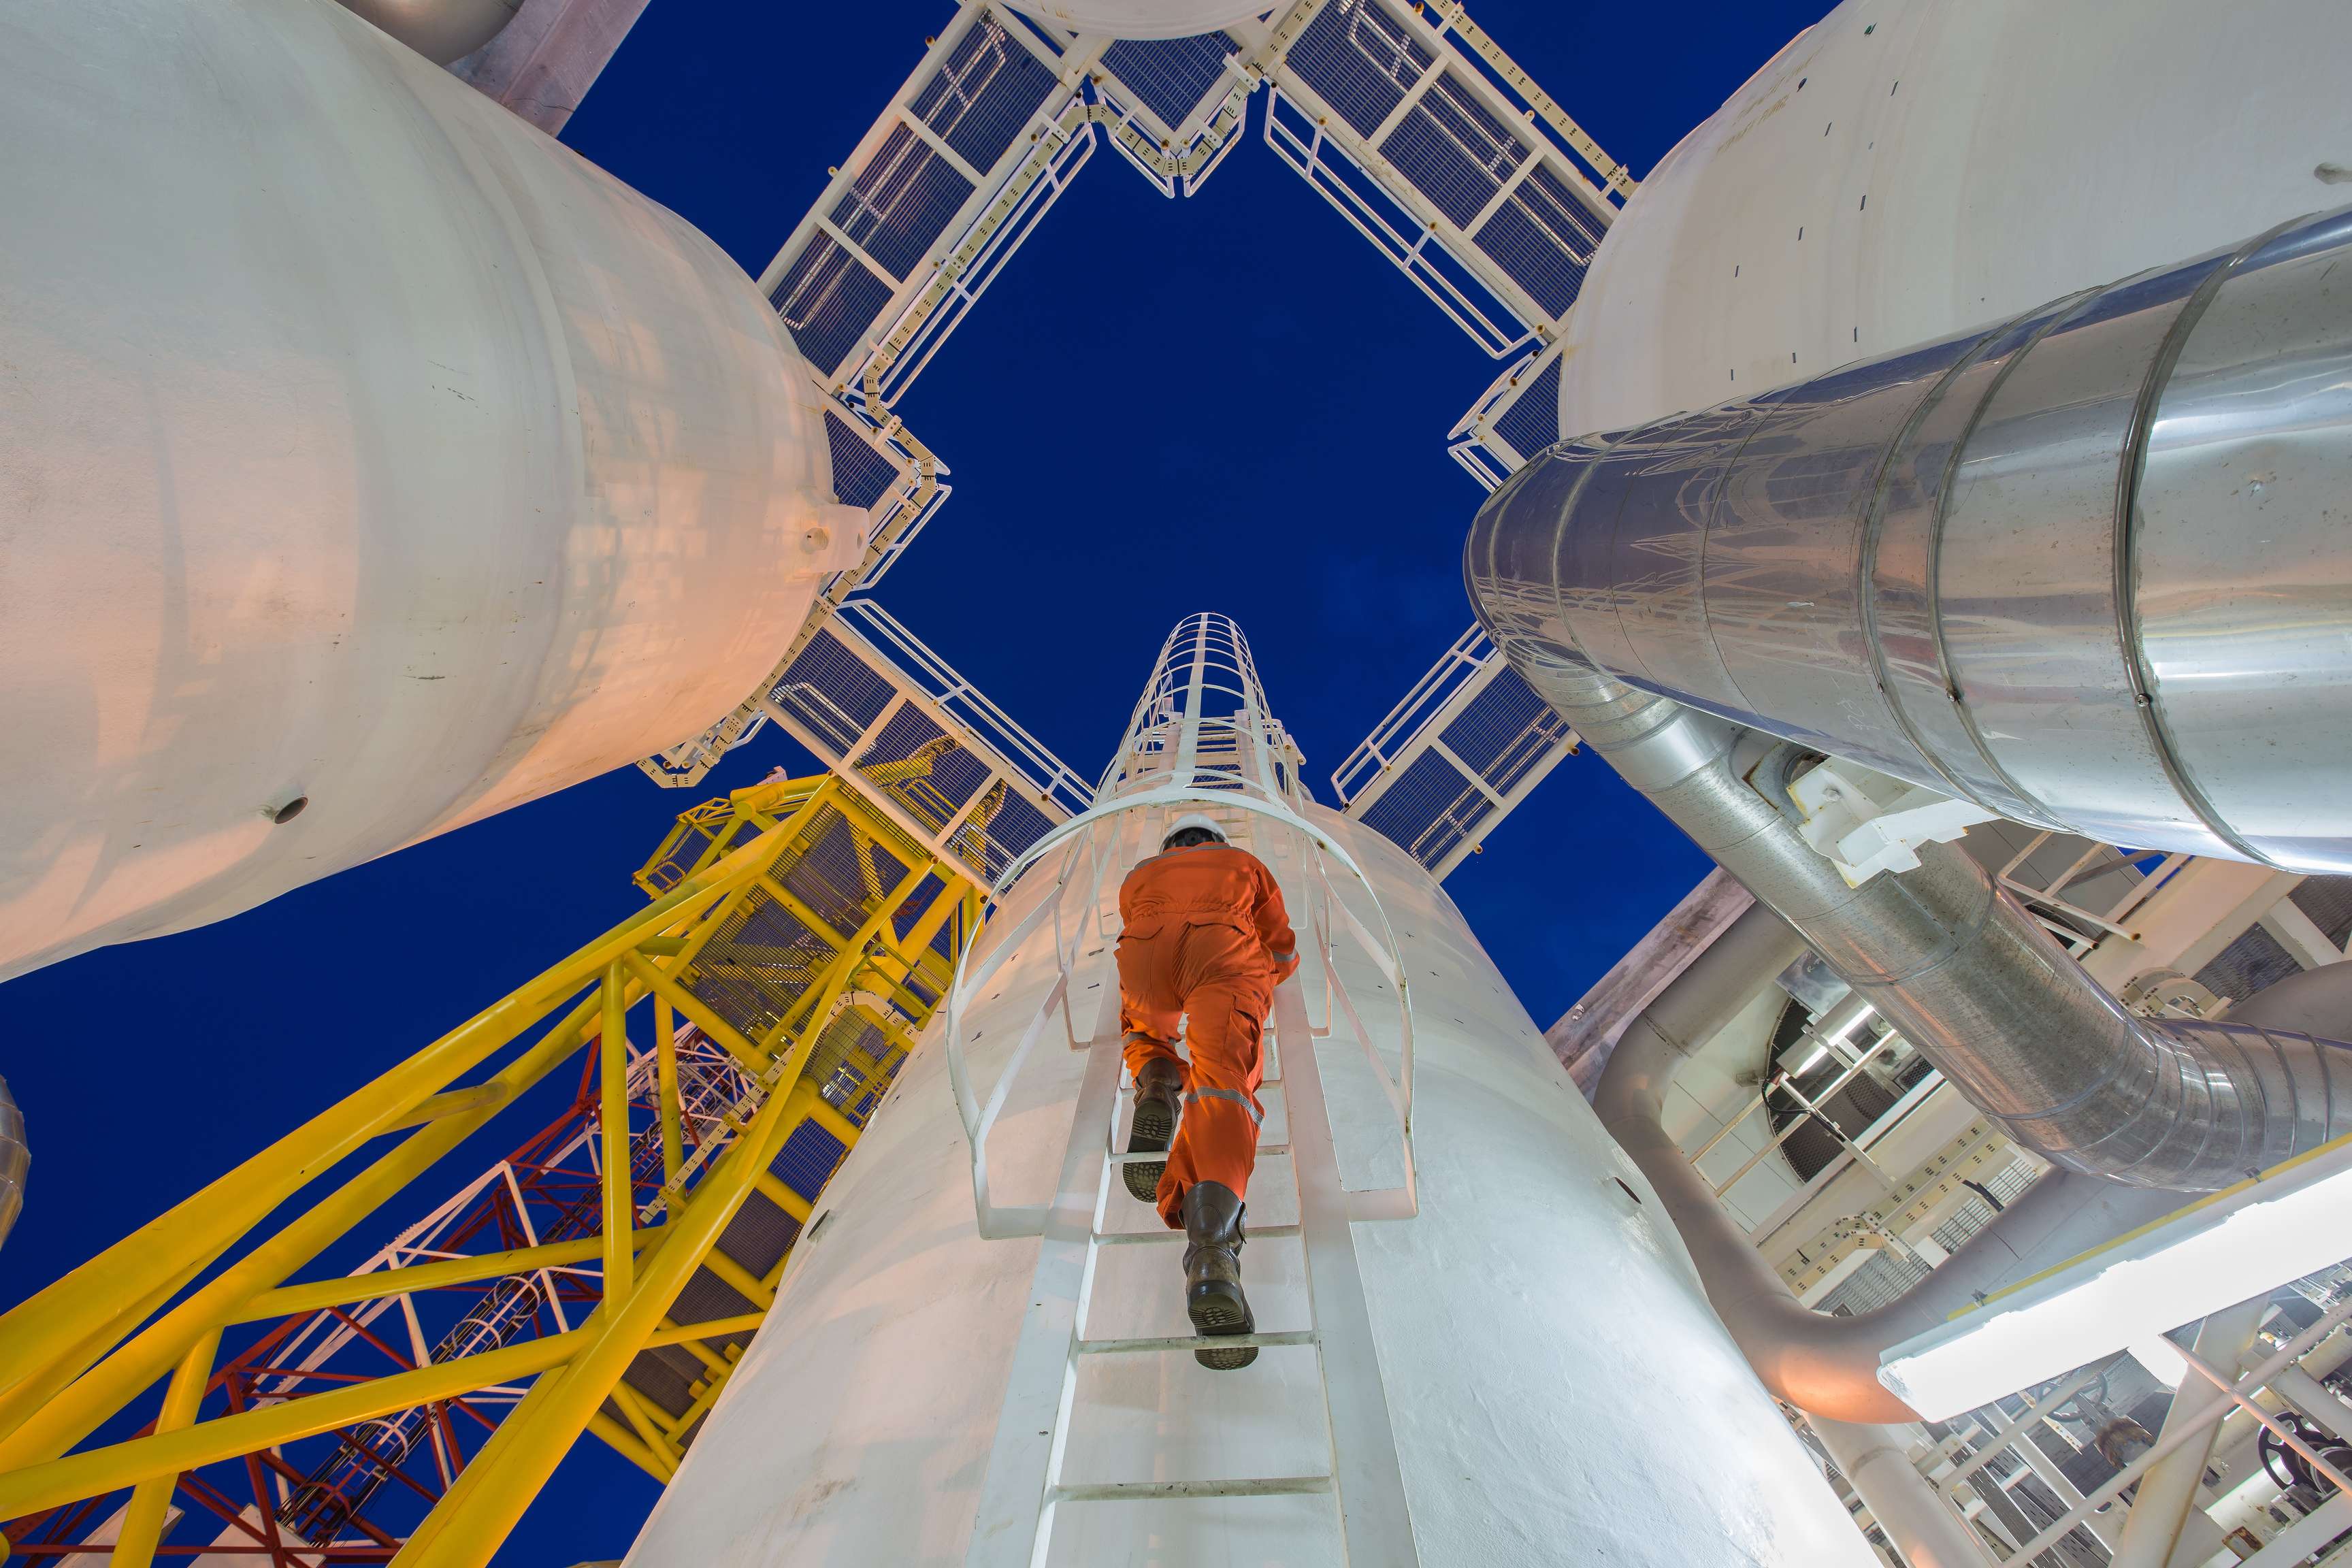 Expert climbing on a cylindrical pressure vessel at night.